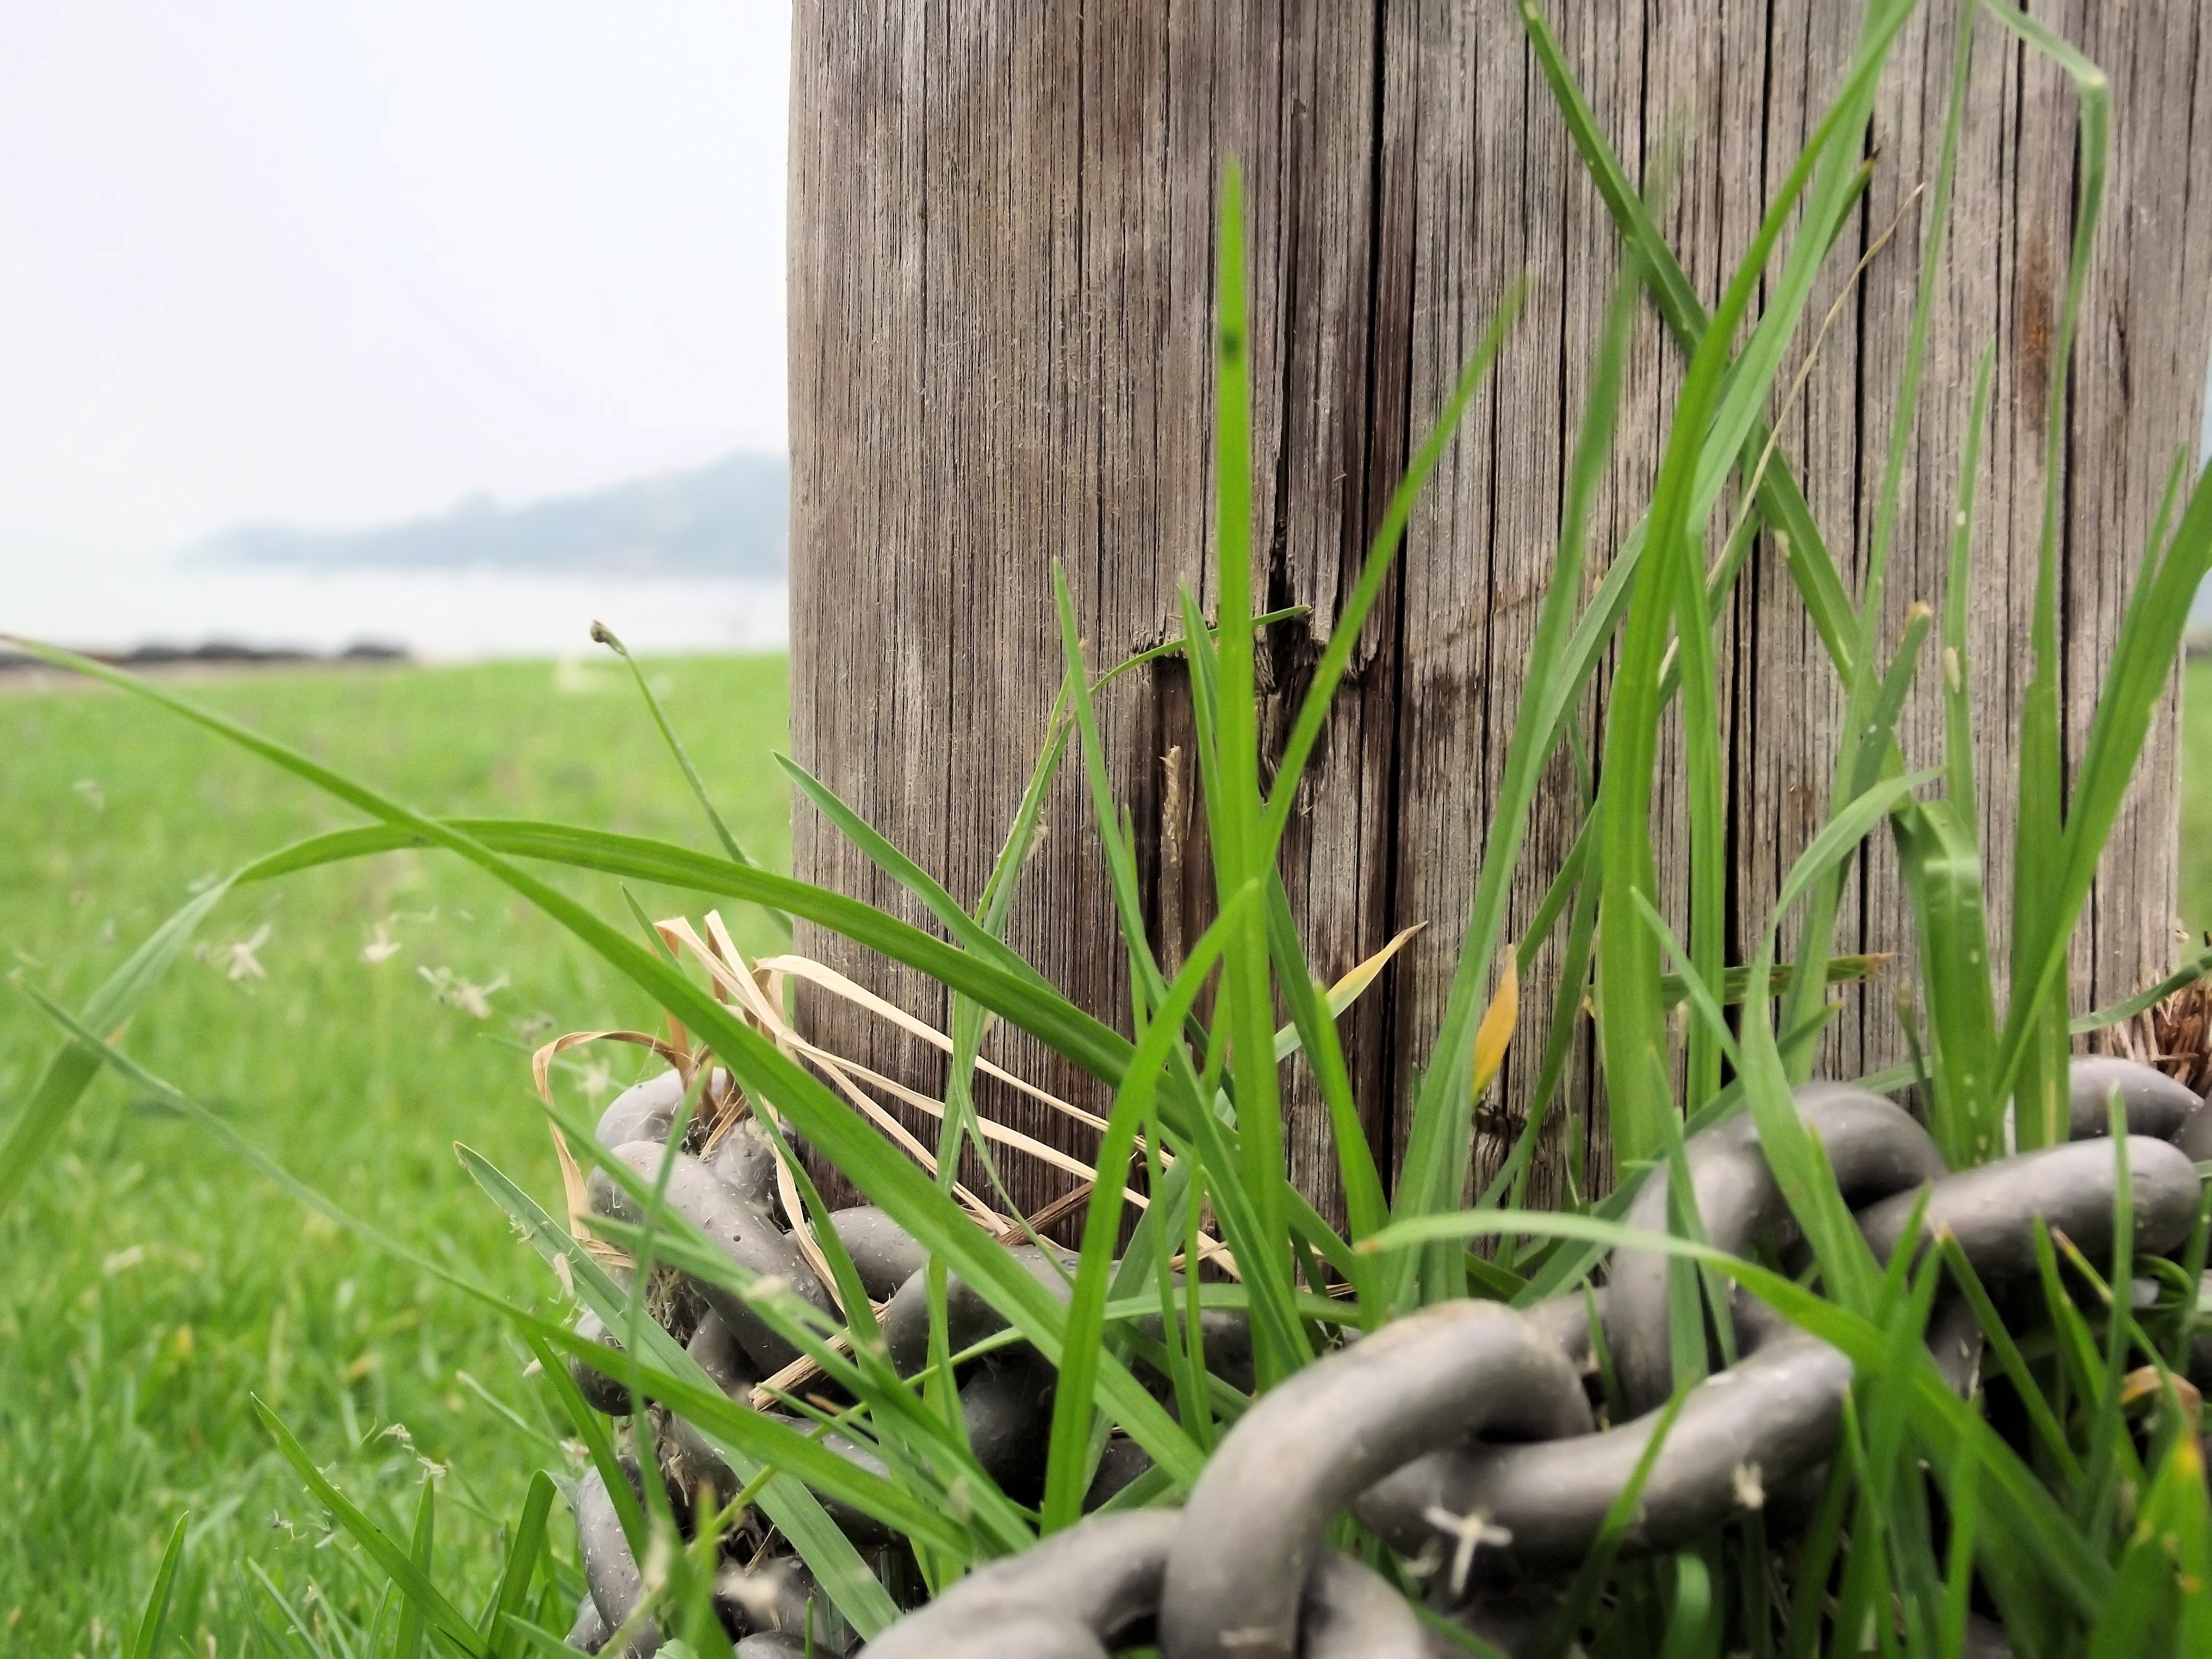 green grasses near wooden surface with chains